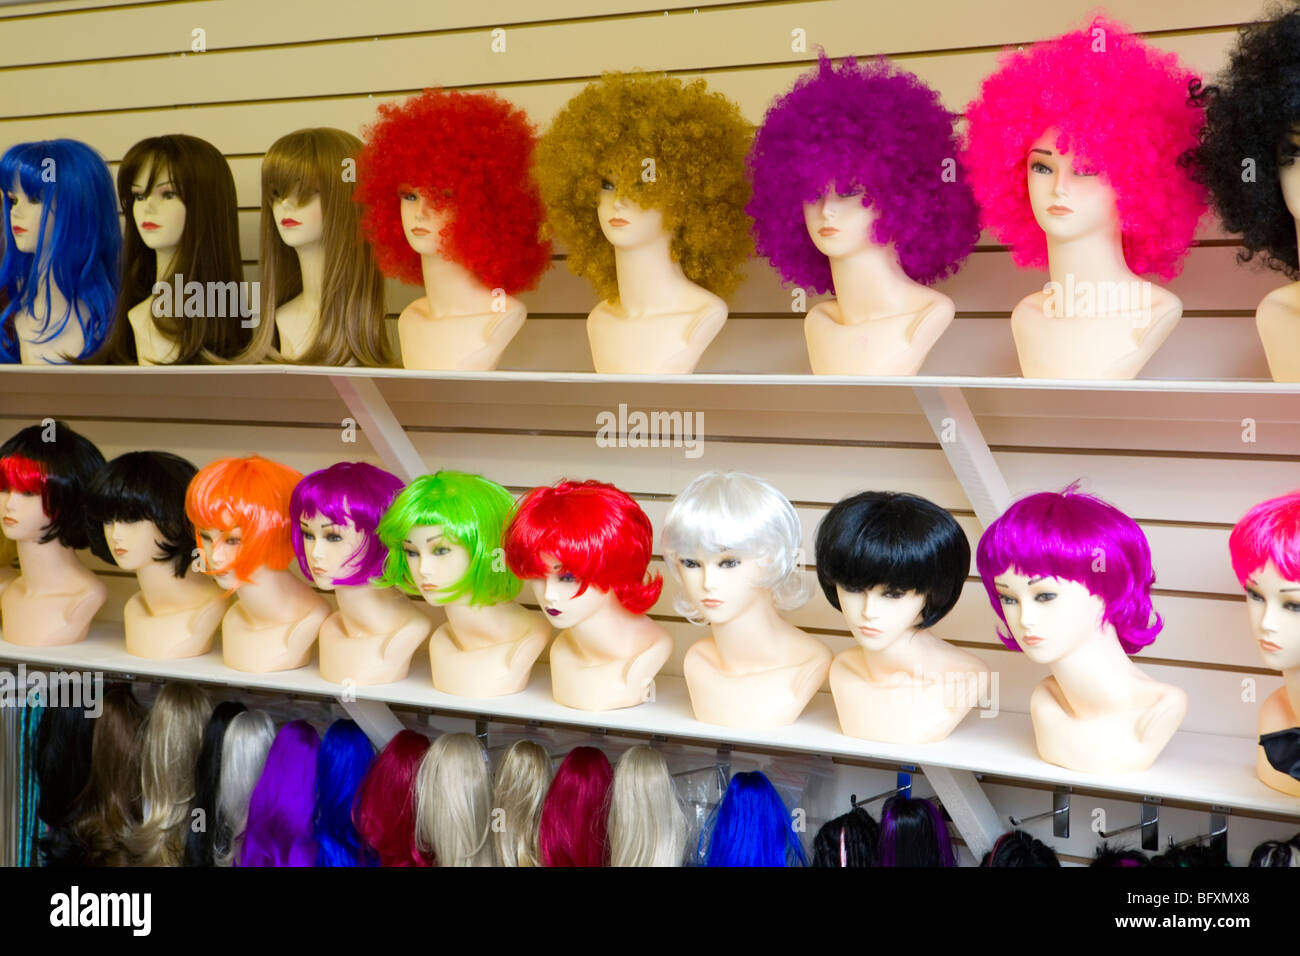 Colorful Wigs on dispaly Stock Photo